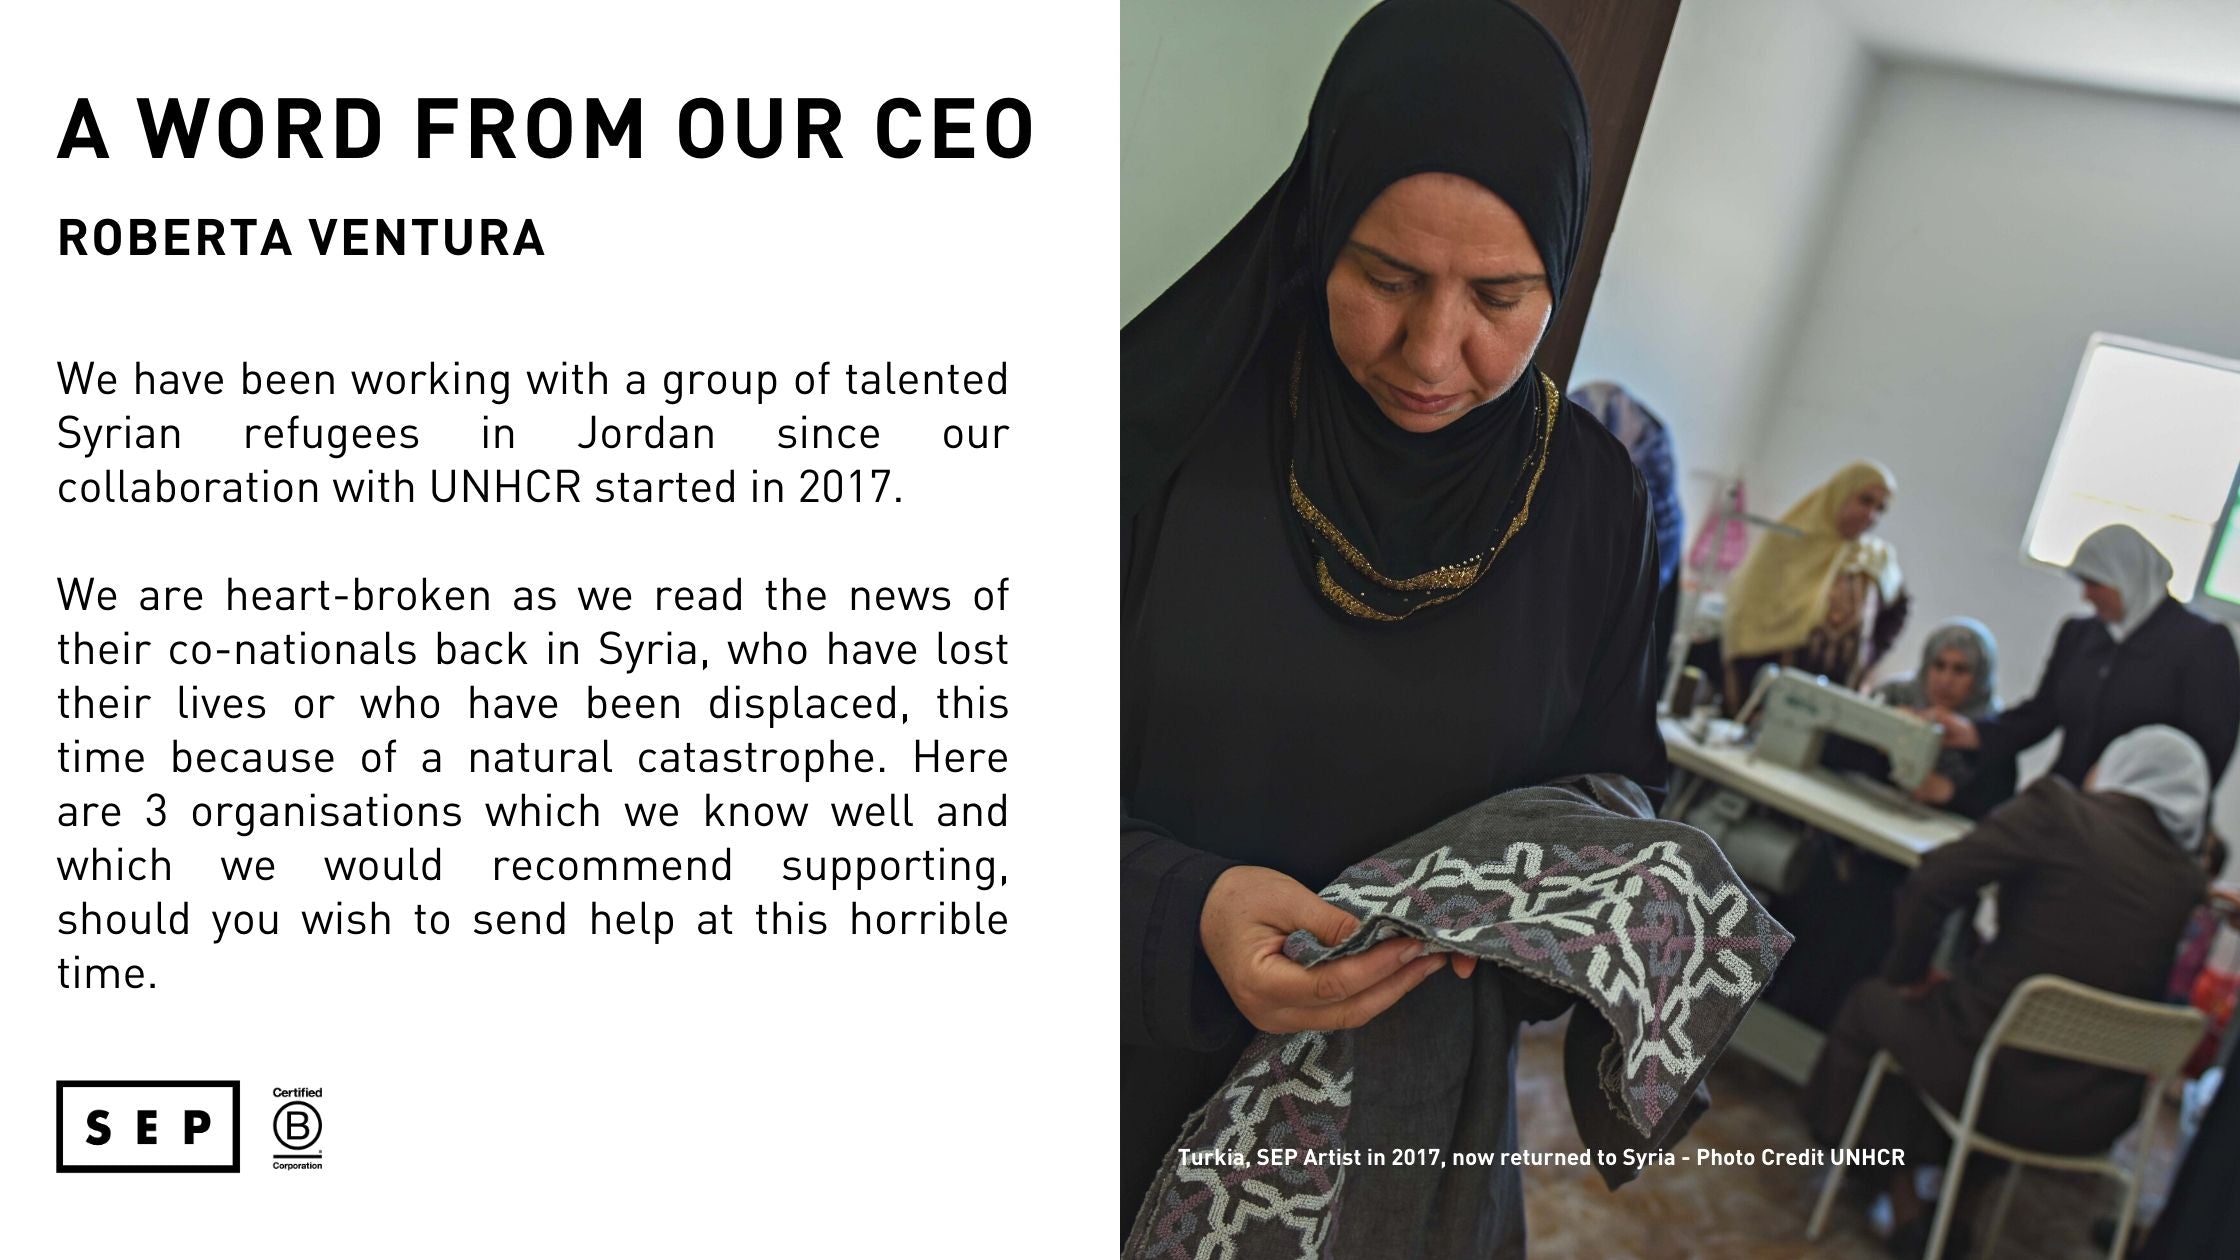 e have been working with a group of talented Syrian refugees in Jordan since our collaboration with UNHCR started in 2017.   We are heart-broken as we read the news of their co-nationals back in Syria, who have lost their lives or who have been displaced, this time because of a natural catastrophe. Here are 3 organisations which we know well and which we would recommend supporting, should you wish to send help at this horrible time.